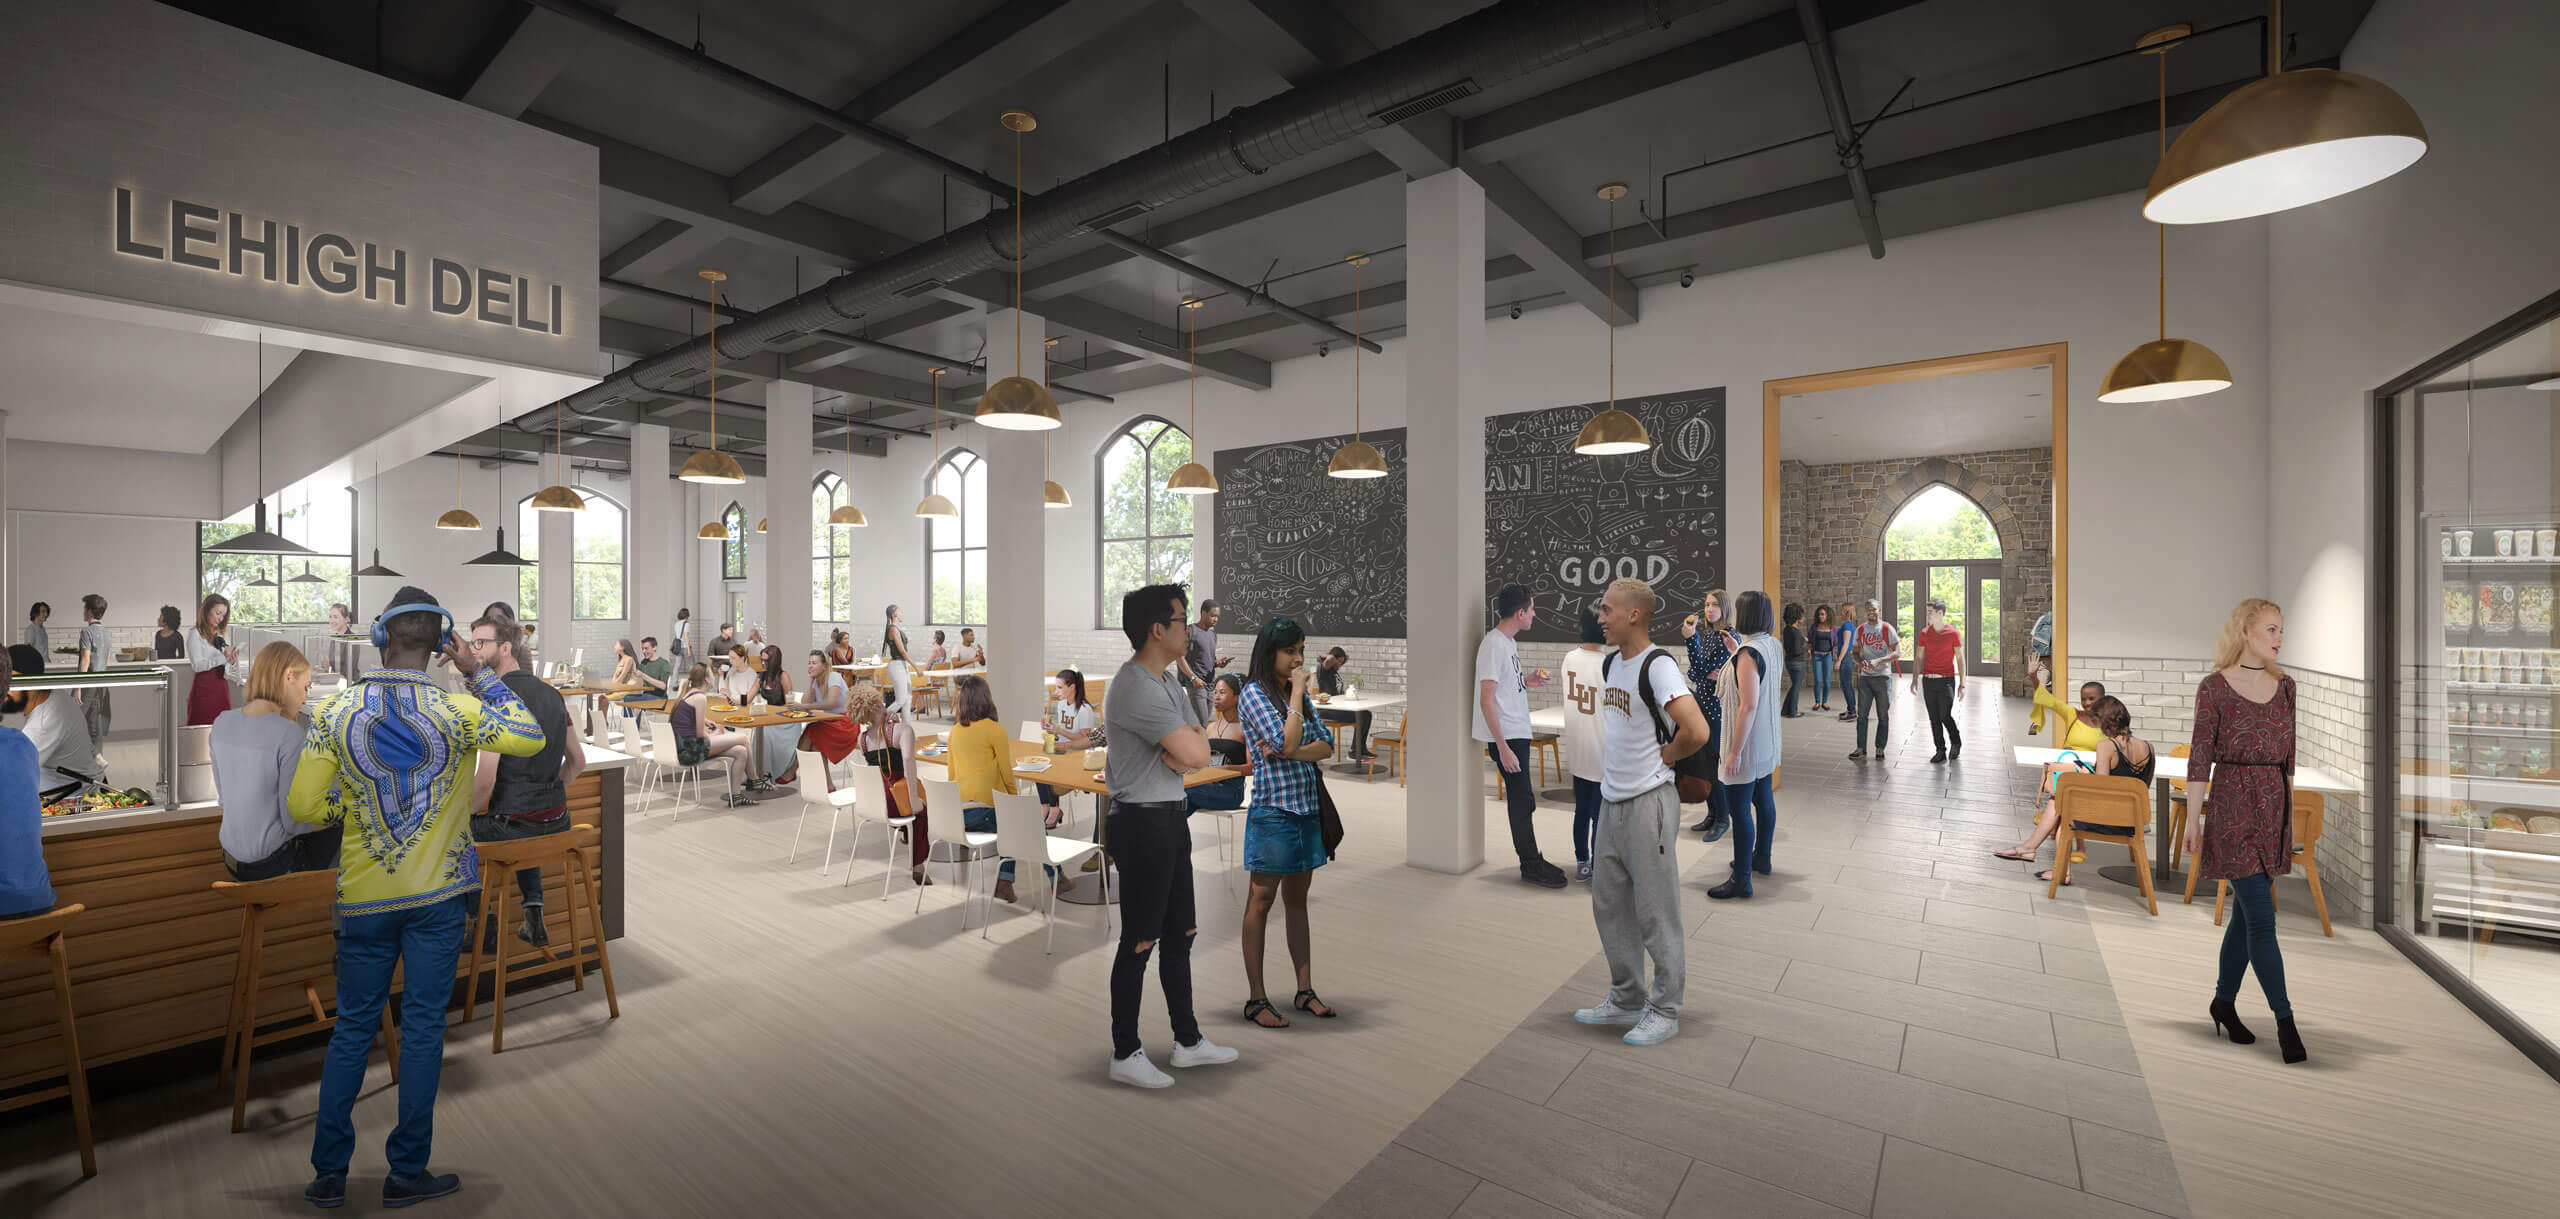 Rendering of the Lower Eatery Space